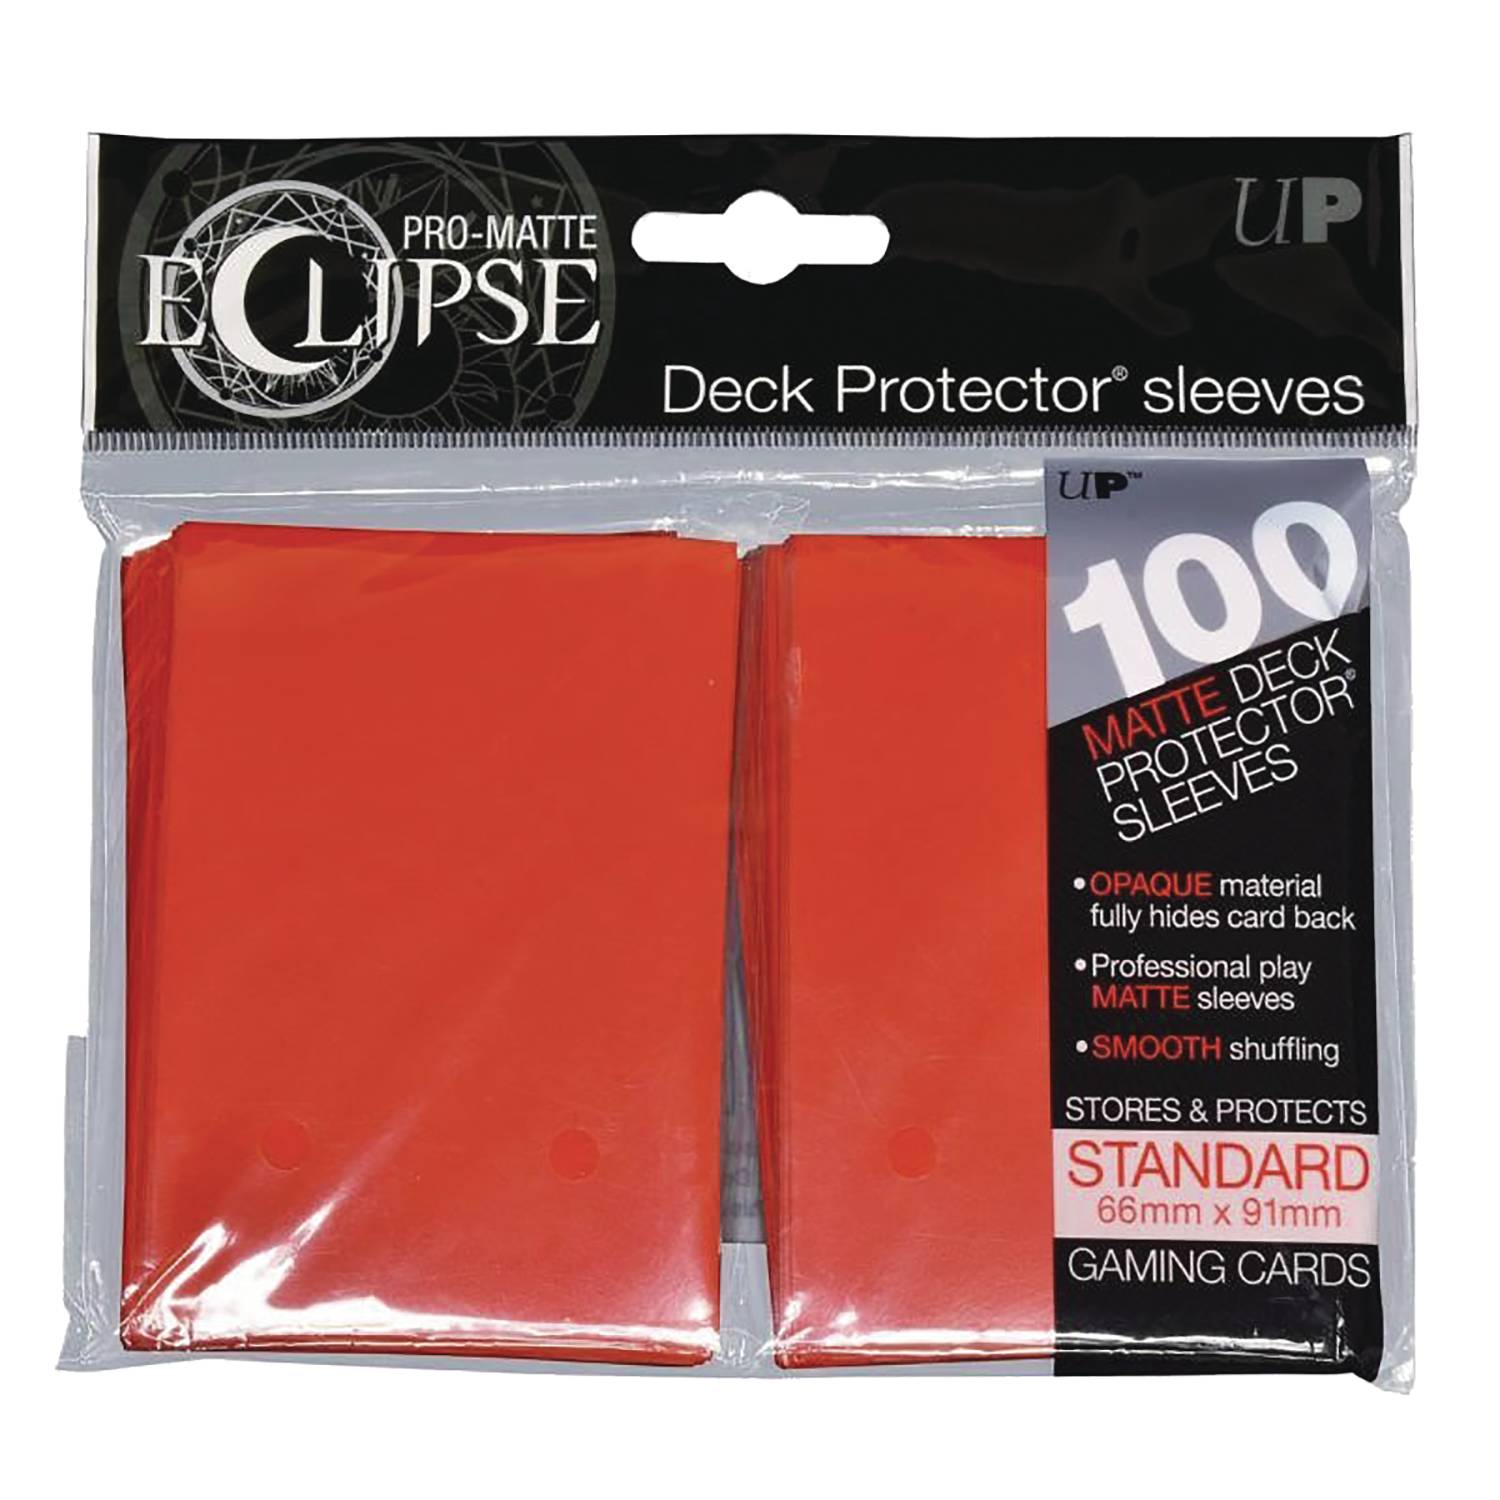 Pro Matte Eclipse 2.0 Deck Protectors Sleeves 100ct Apple Red